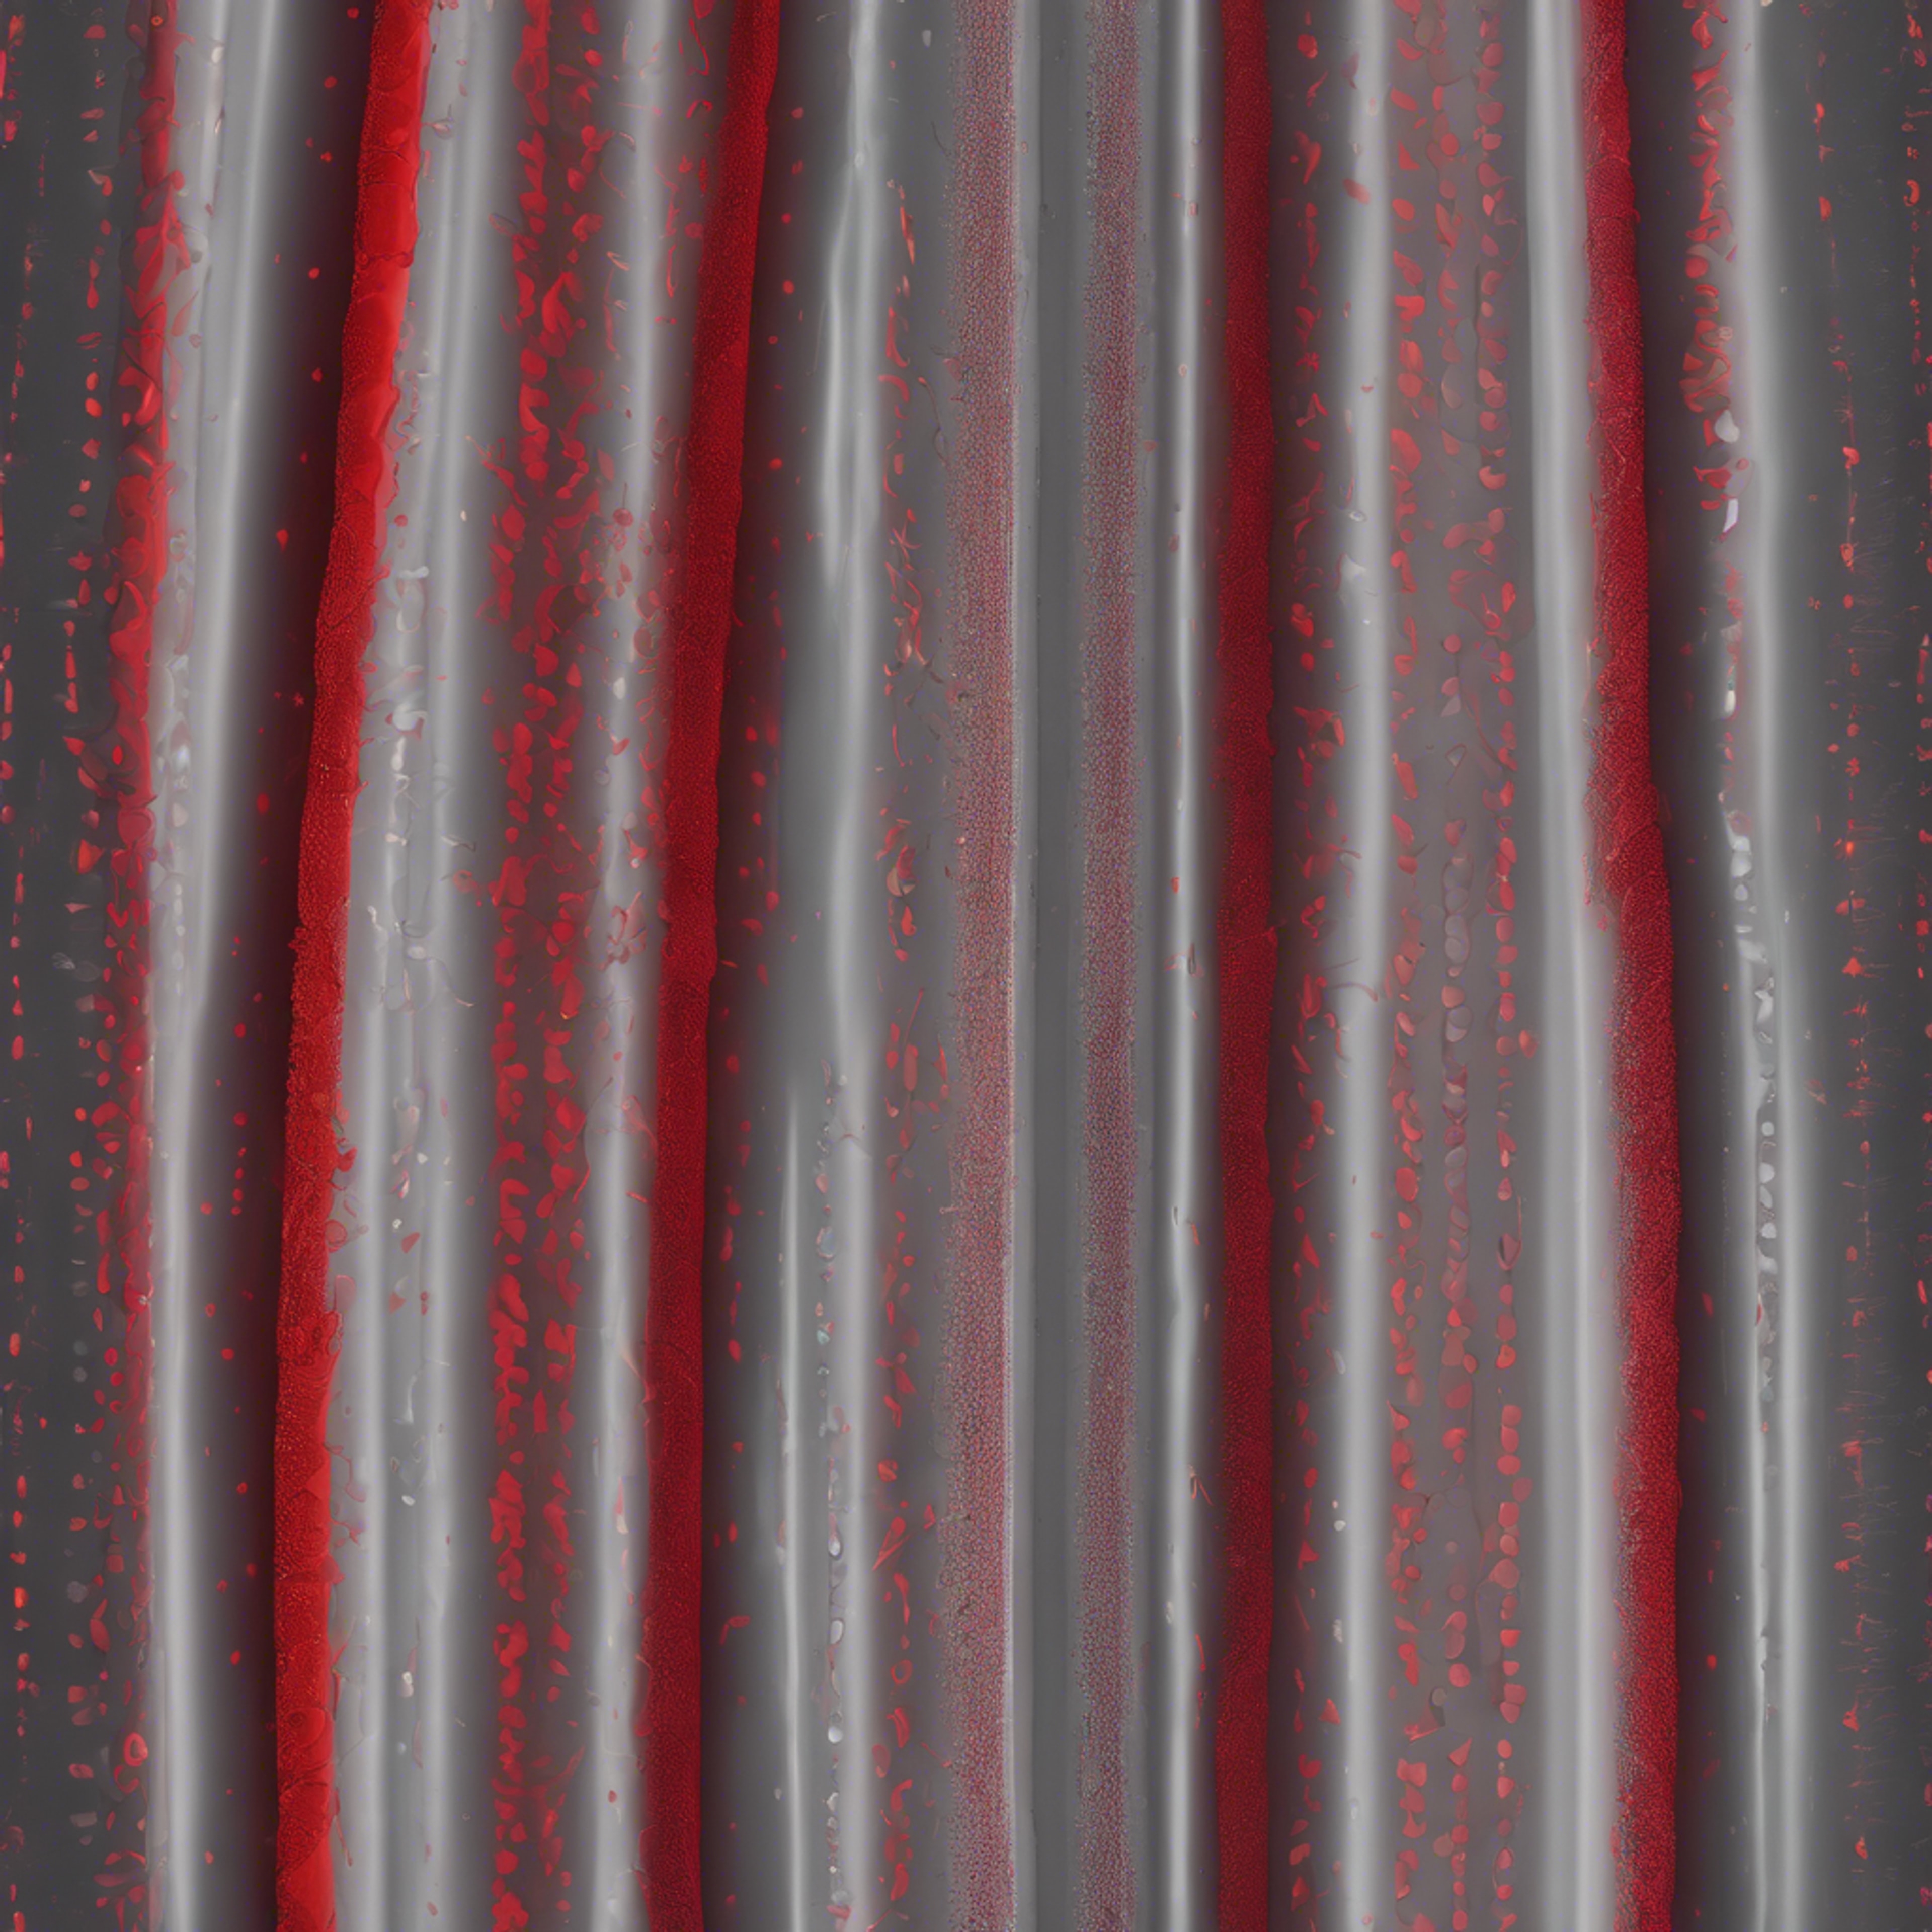 An abstract pattern with hallucinogenic red and grey gradients blending into each other. Tapeta[5c97b162f4f748b39a07]